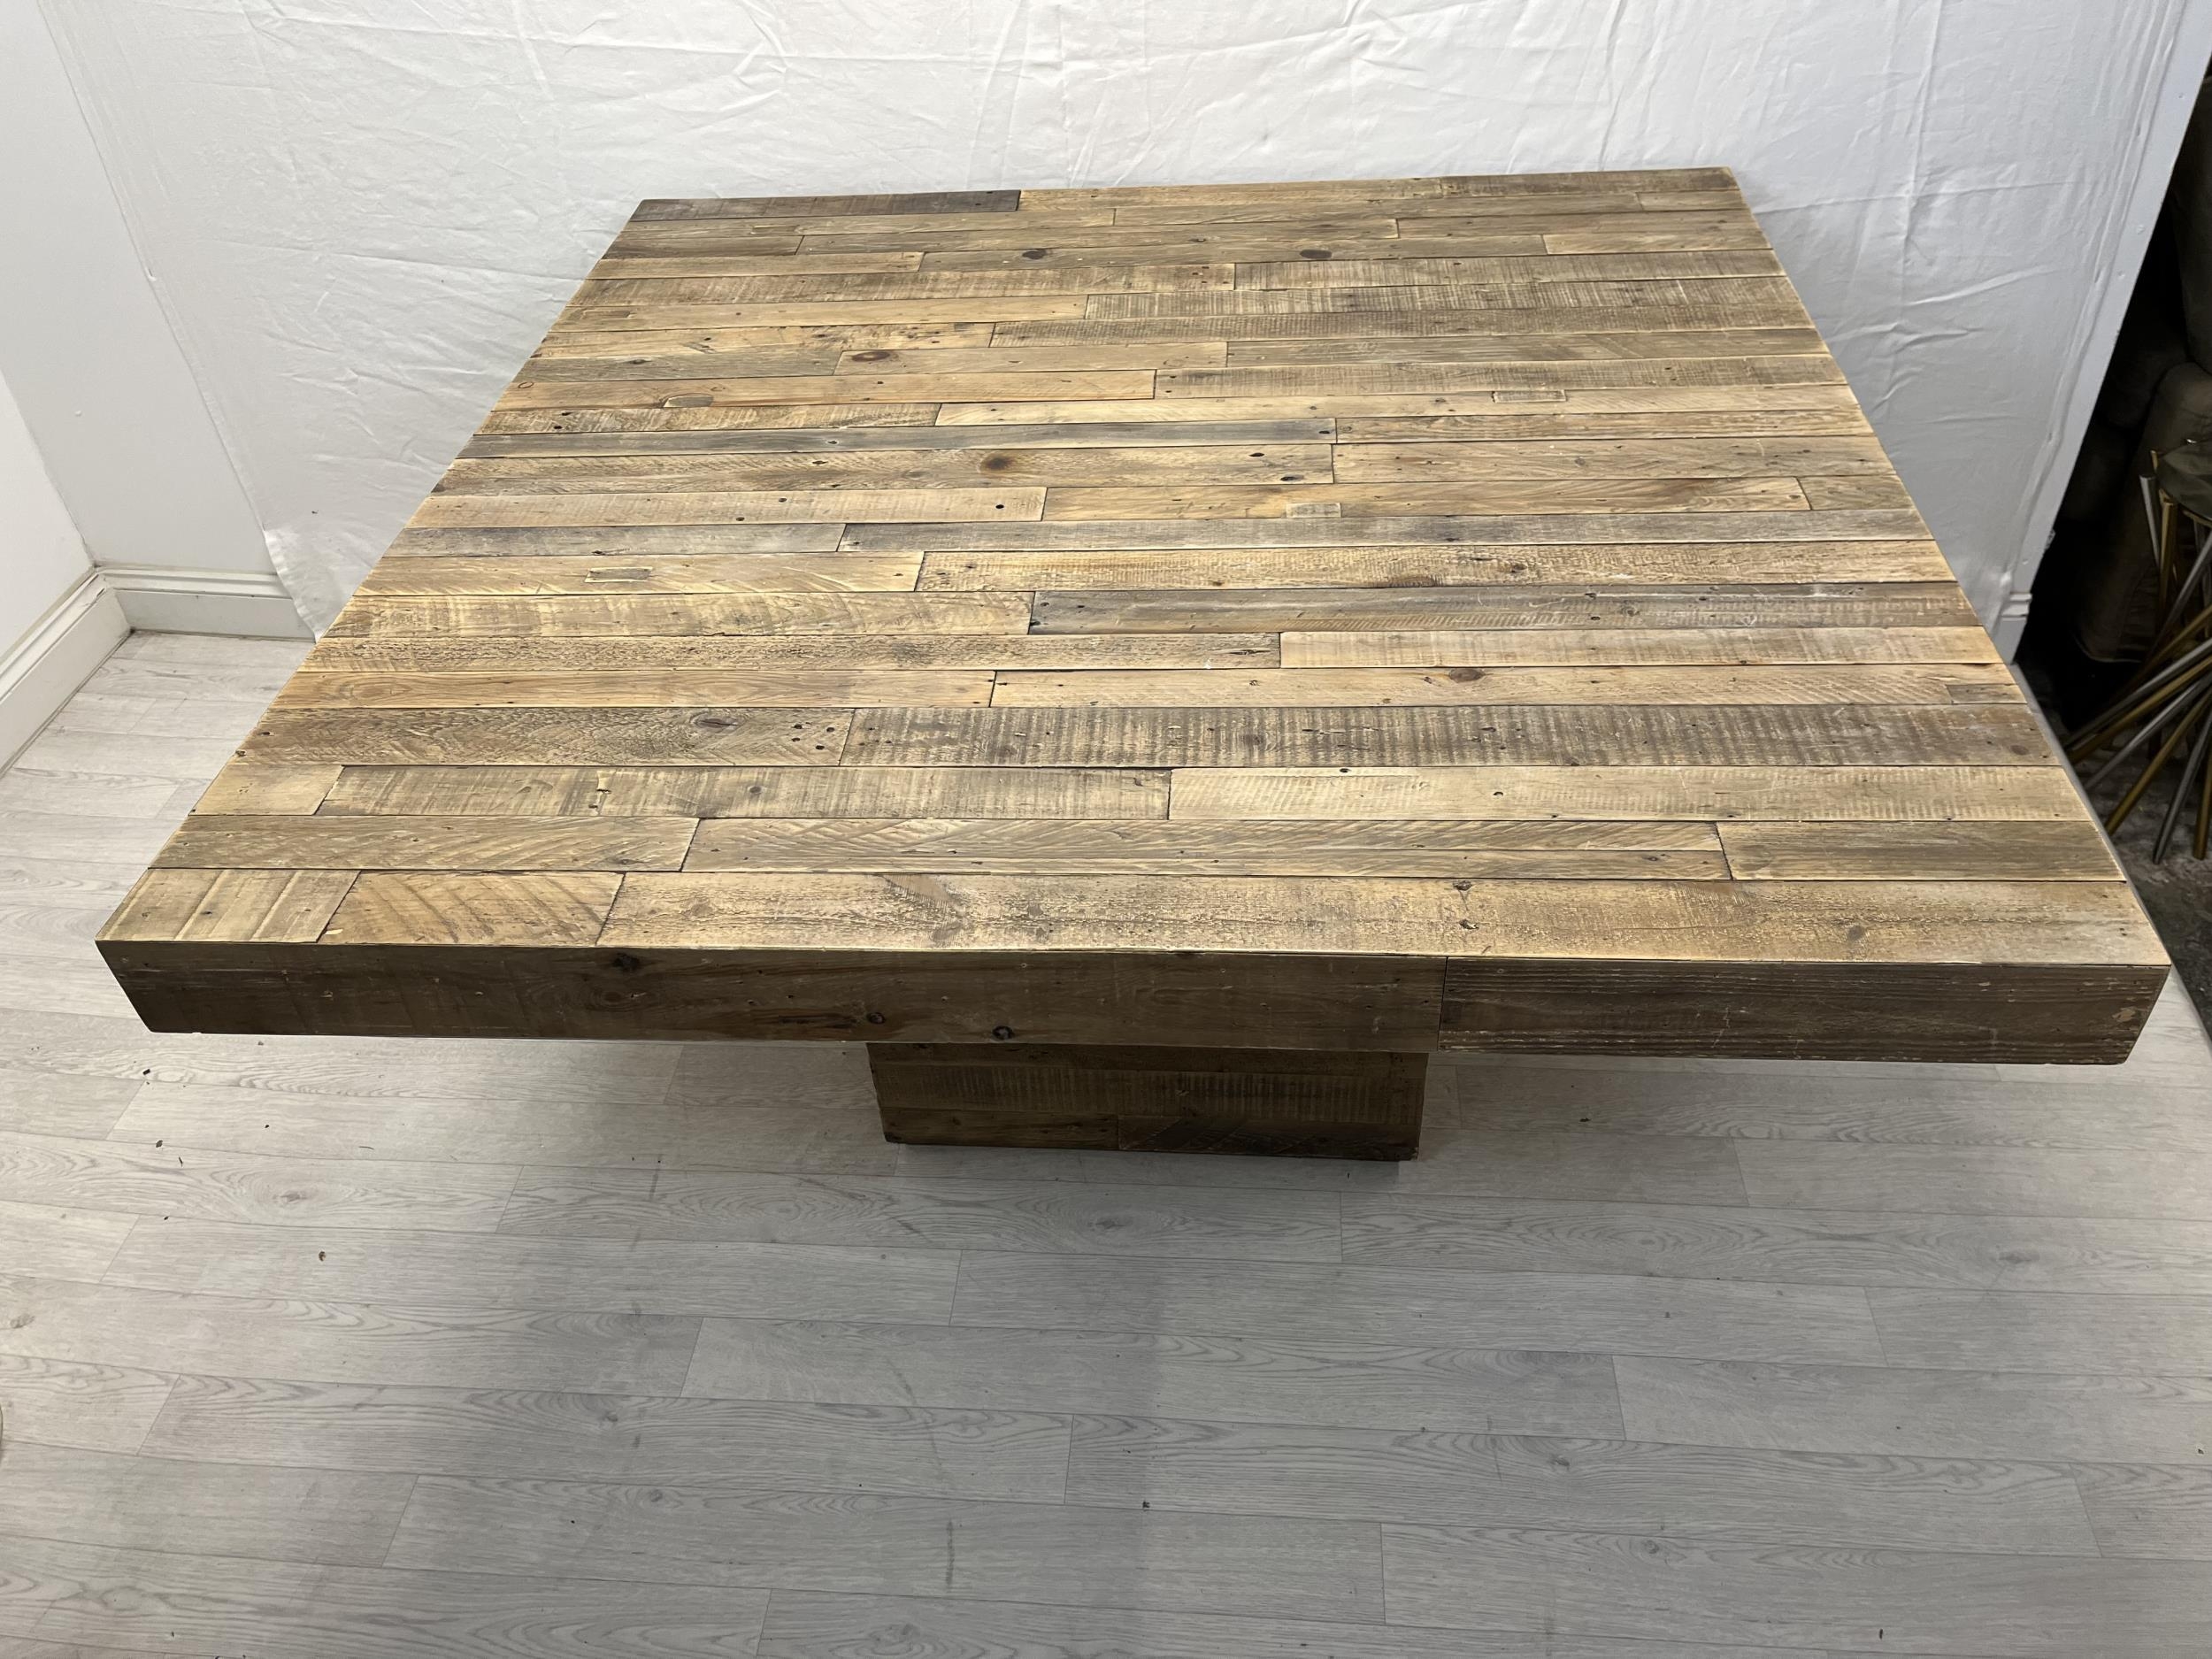 Dining table, contemporary from reclaimed timber. Comes in two parts. H.76 W.148 D.148cm. - Image 2 of 5